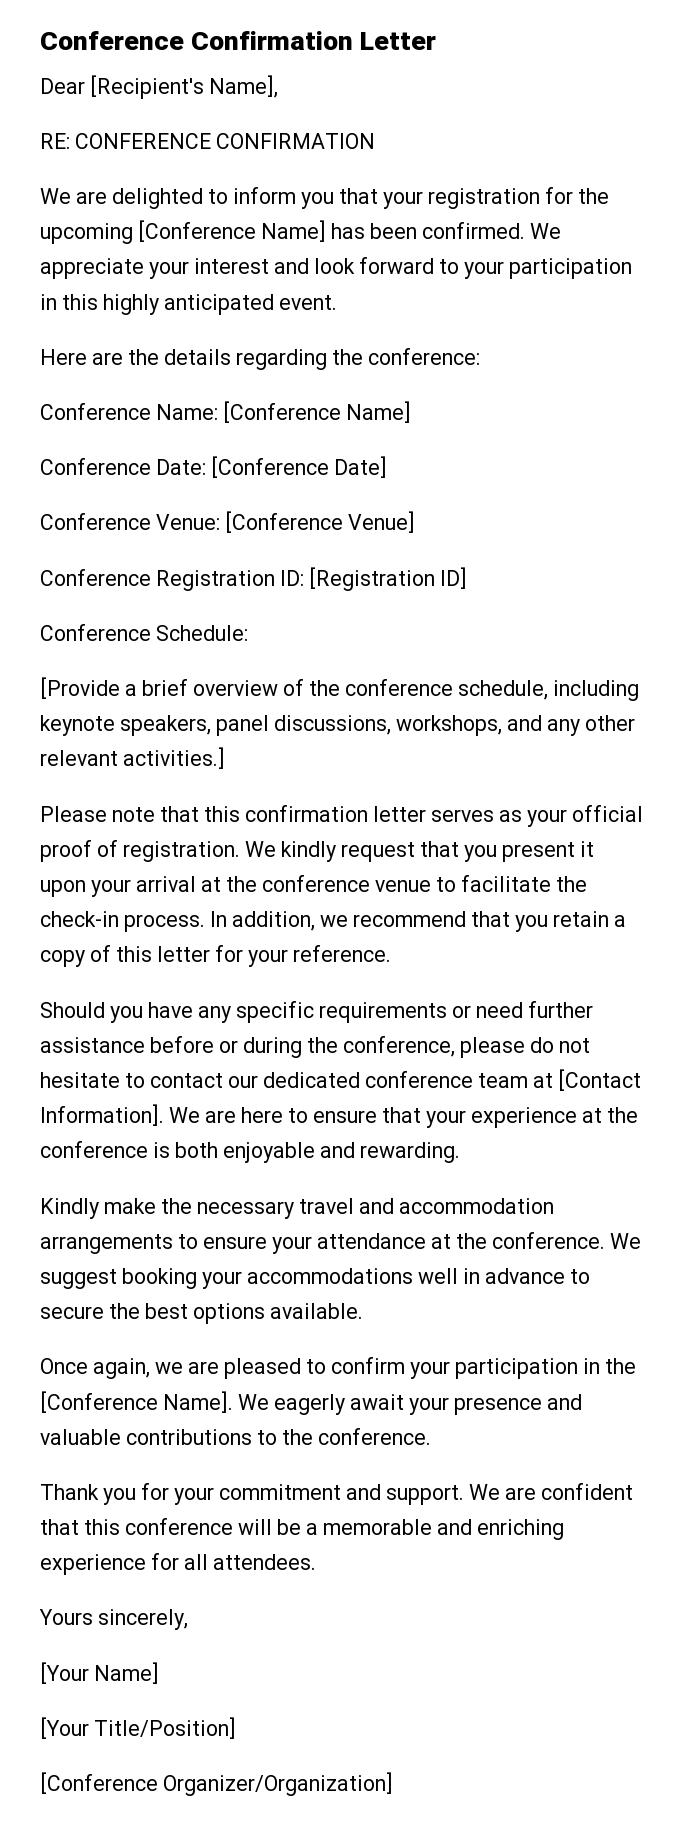 Conference Confirmation Letter